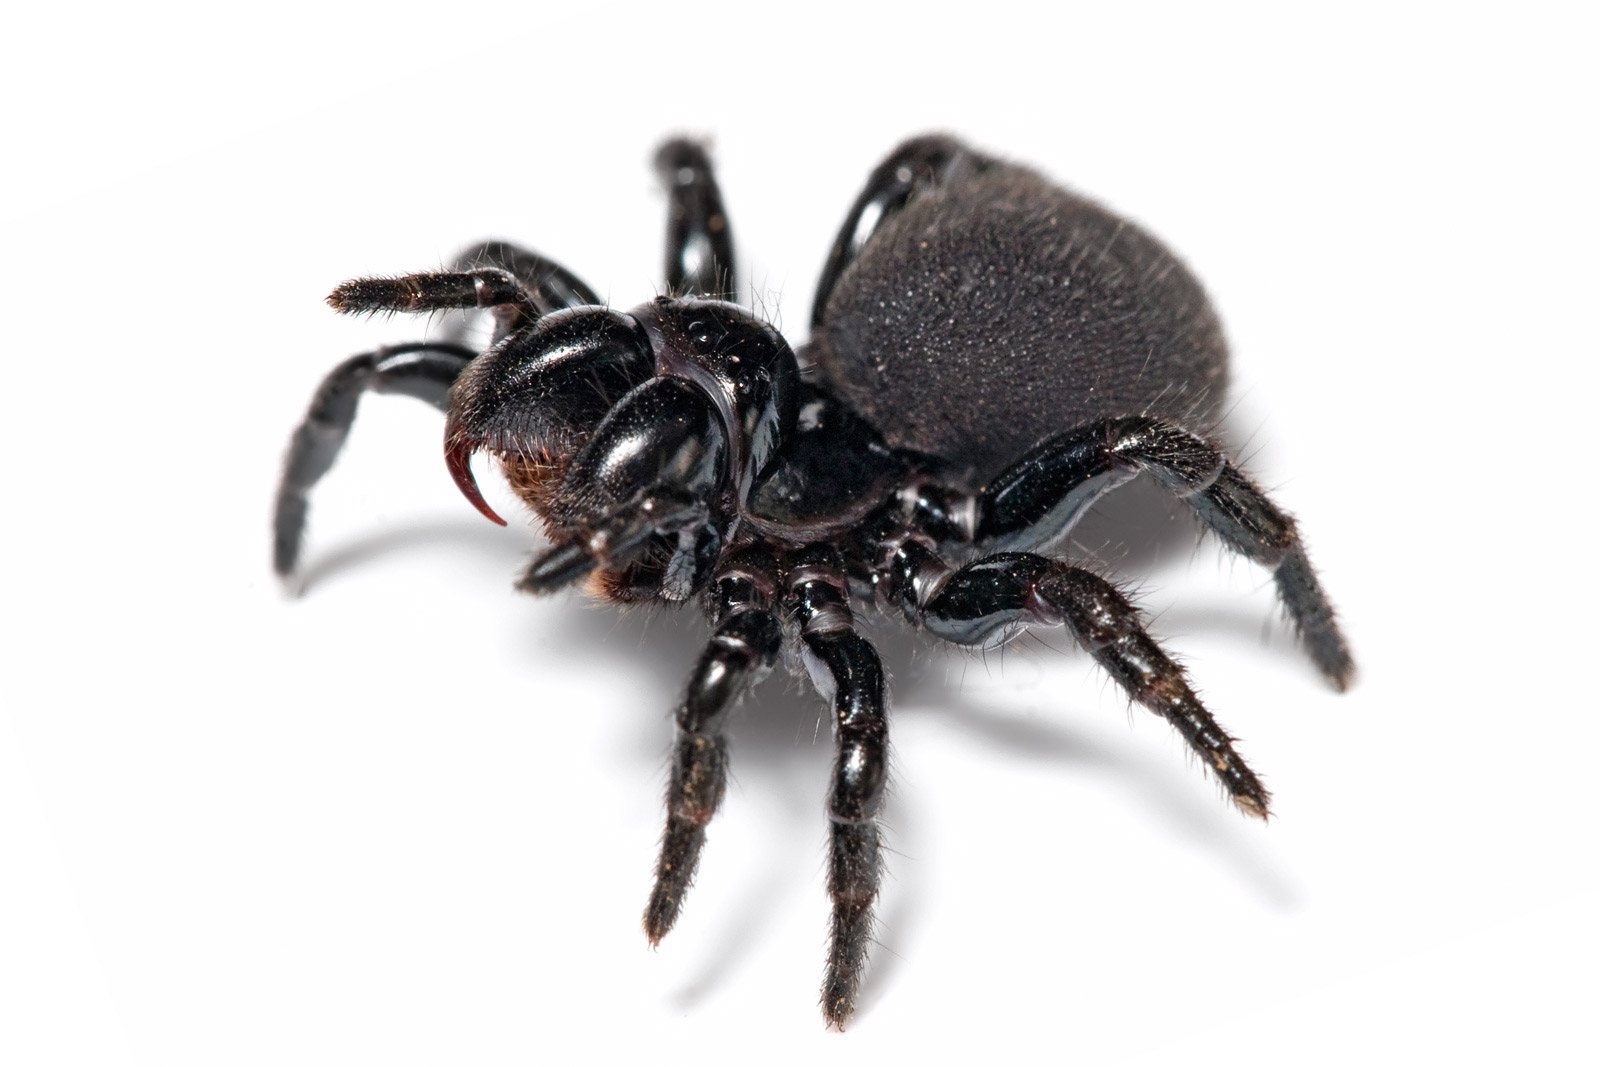 This is a photo of a Mouse Spider